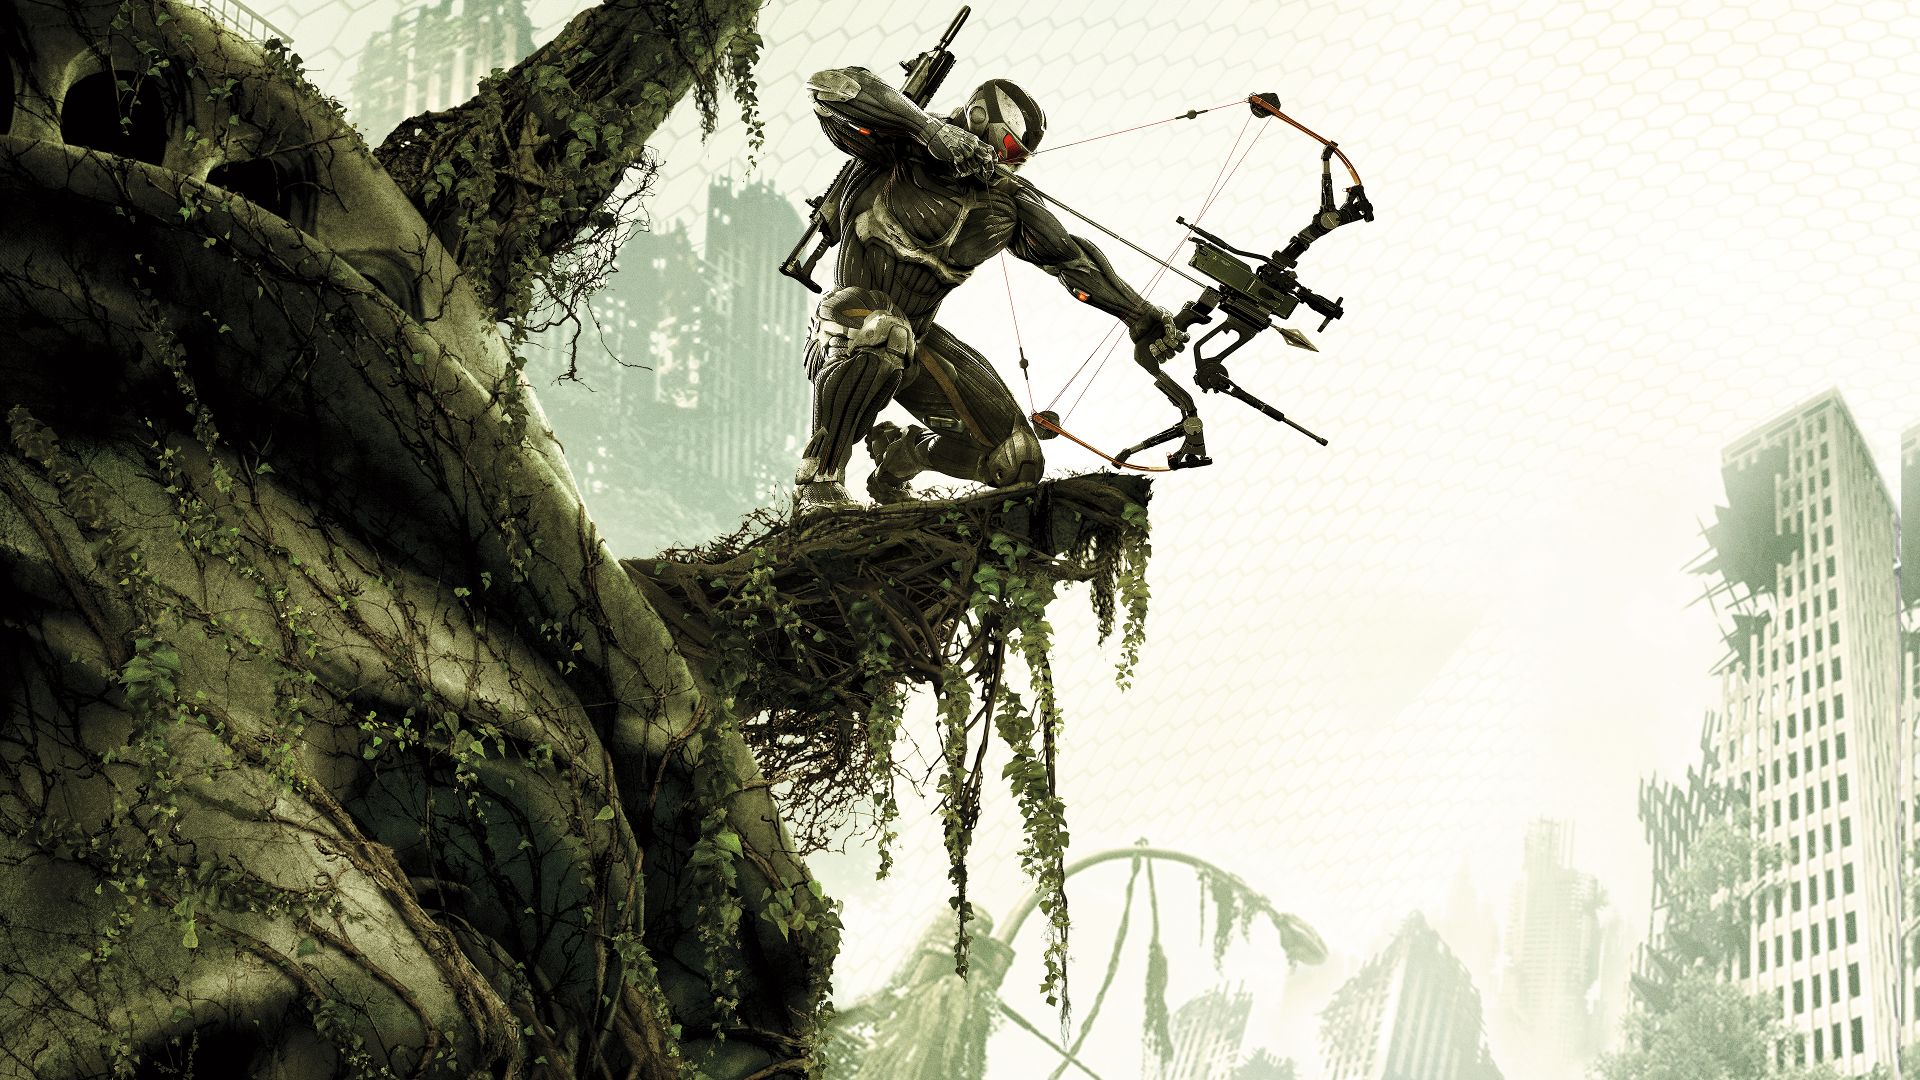 free download crysis 3 xbox one